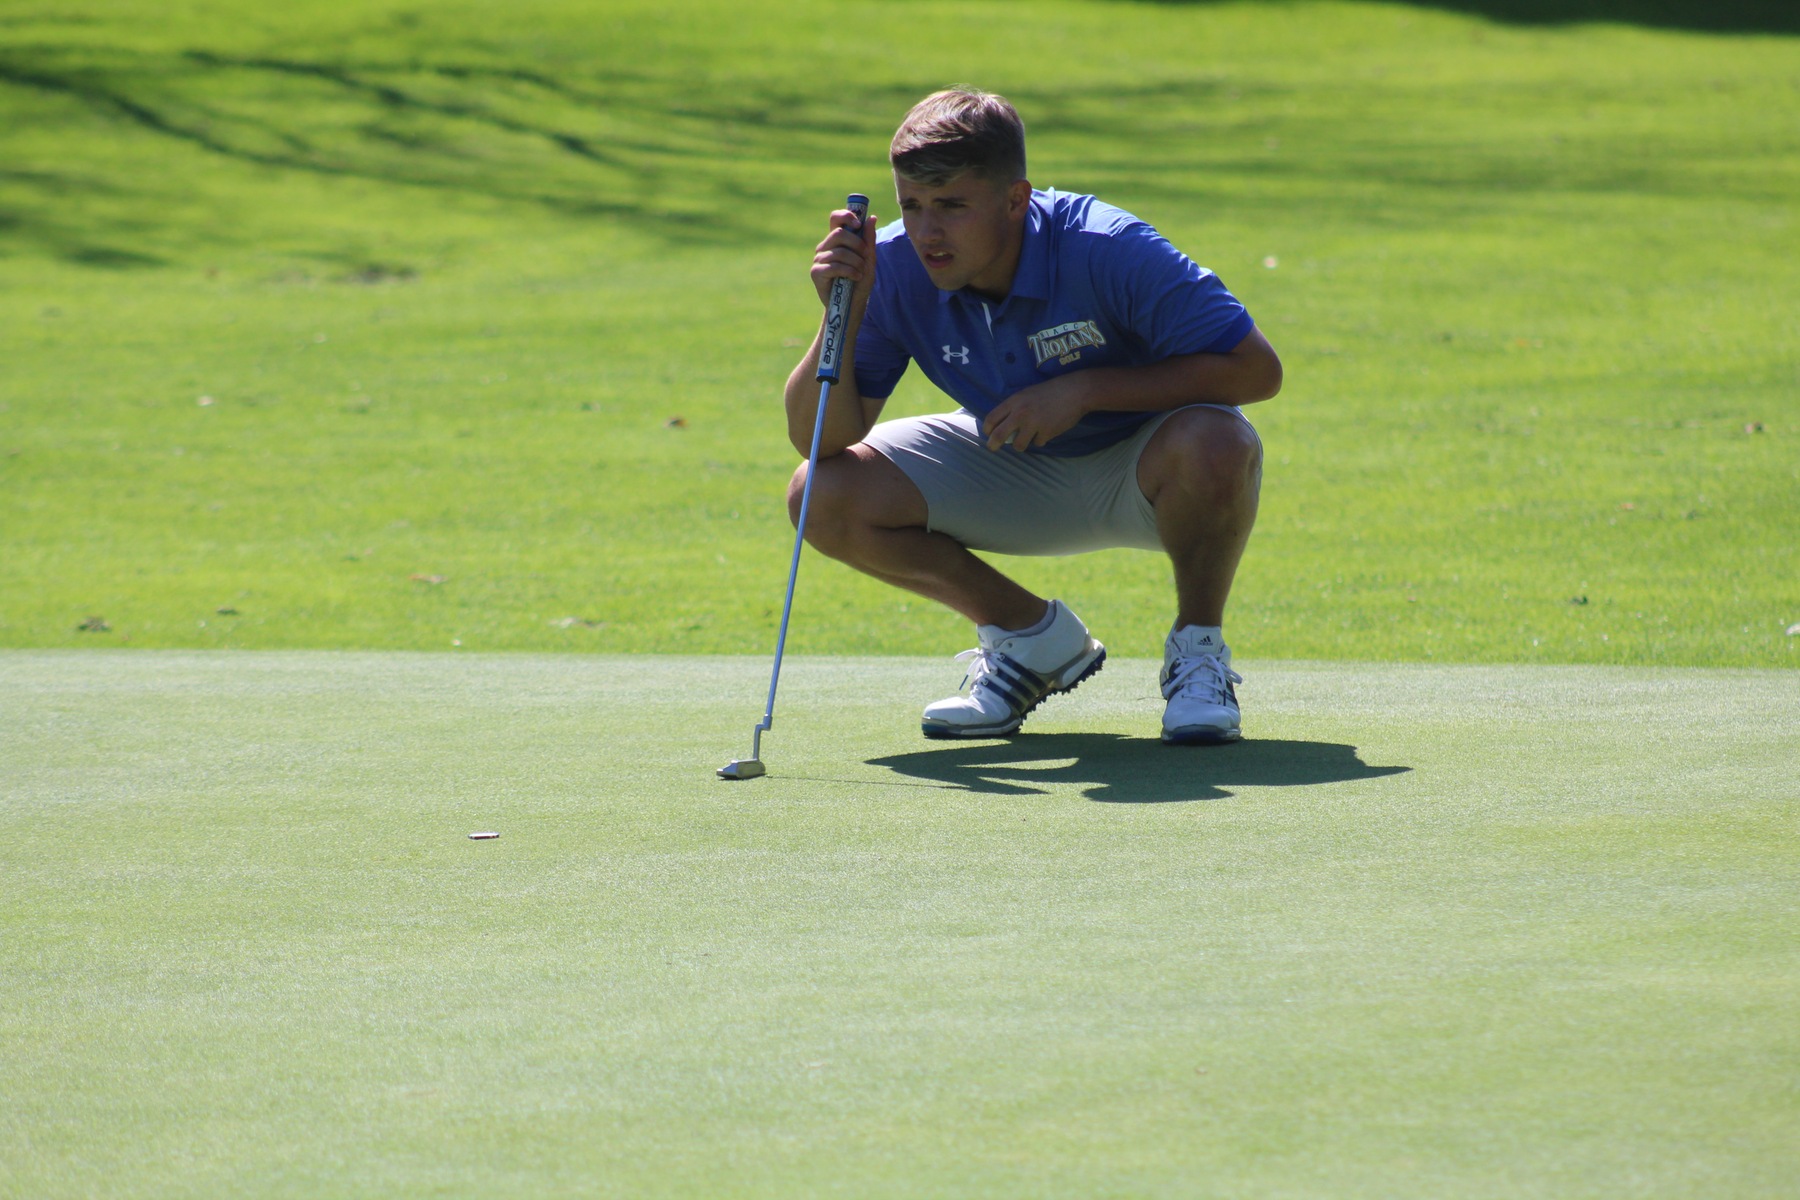 Jackson Hamlin lines up a putt at the NIACC Invitational on Monday at the Mason City Country Club.